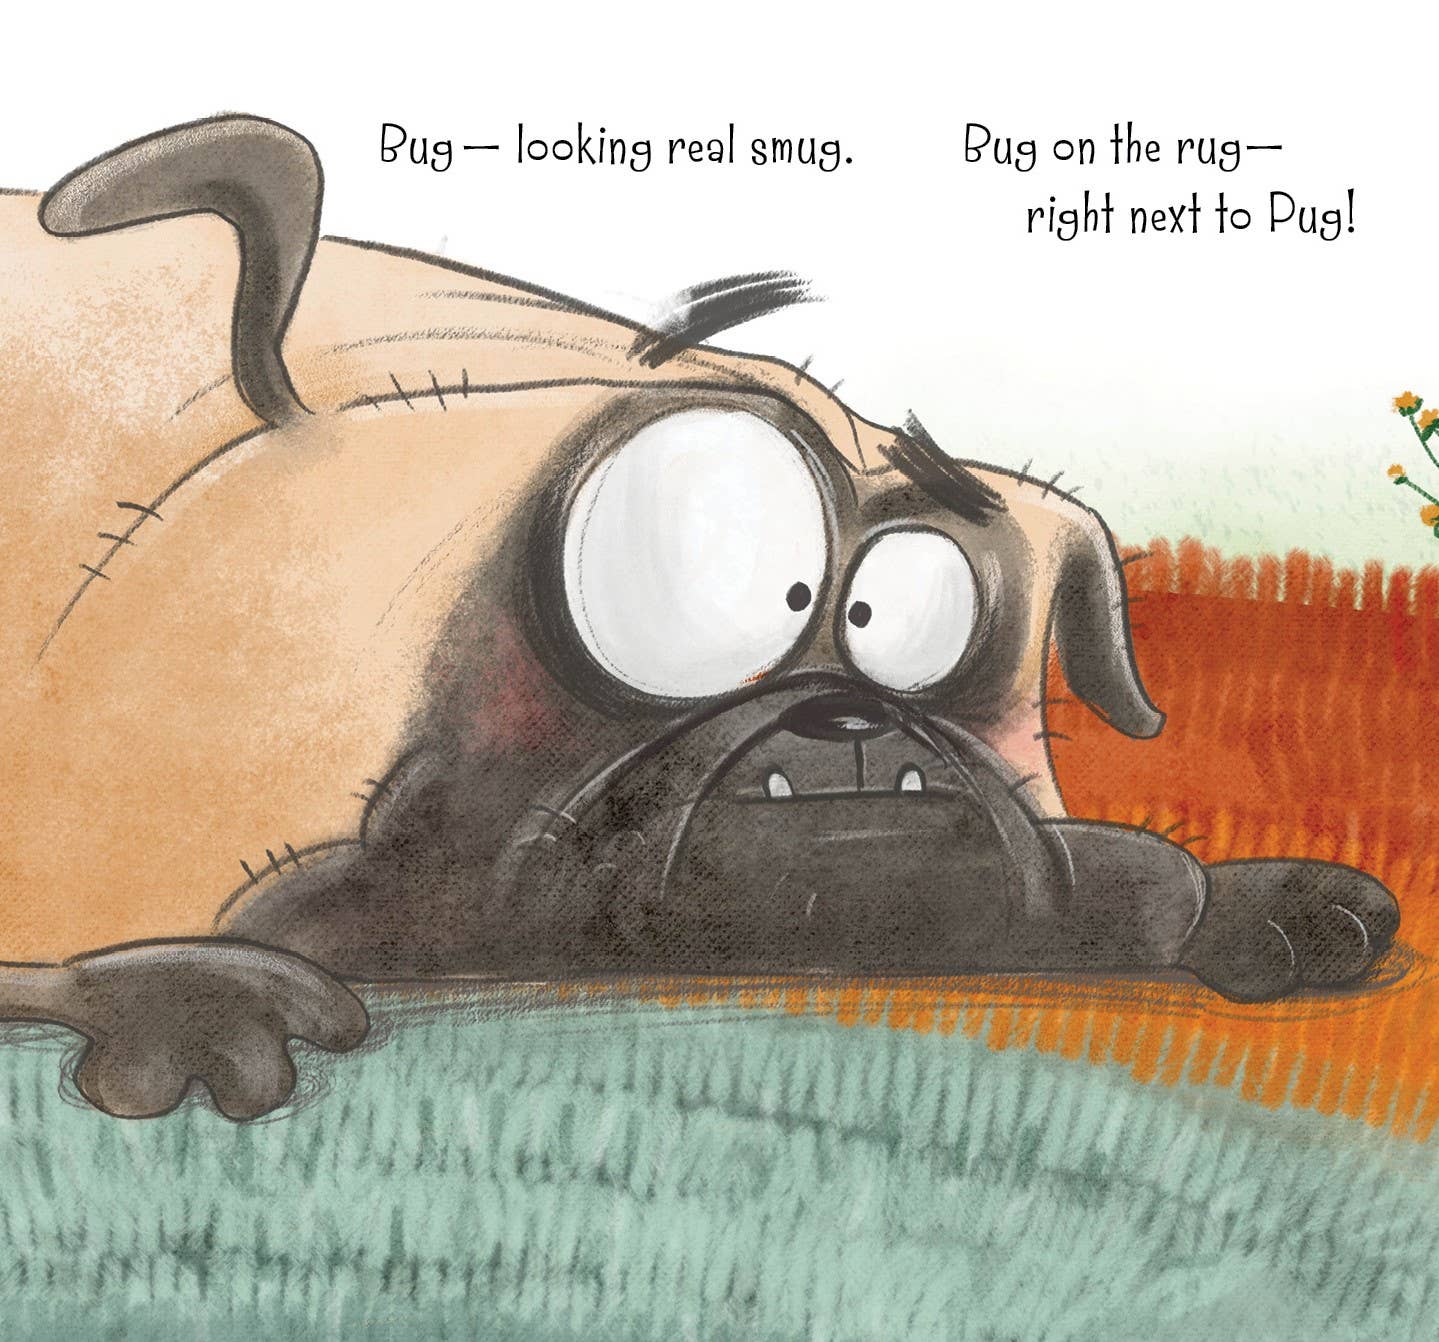 Bug on the Rug picture book